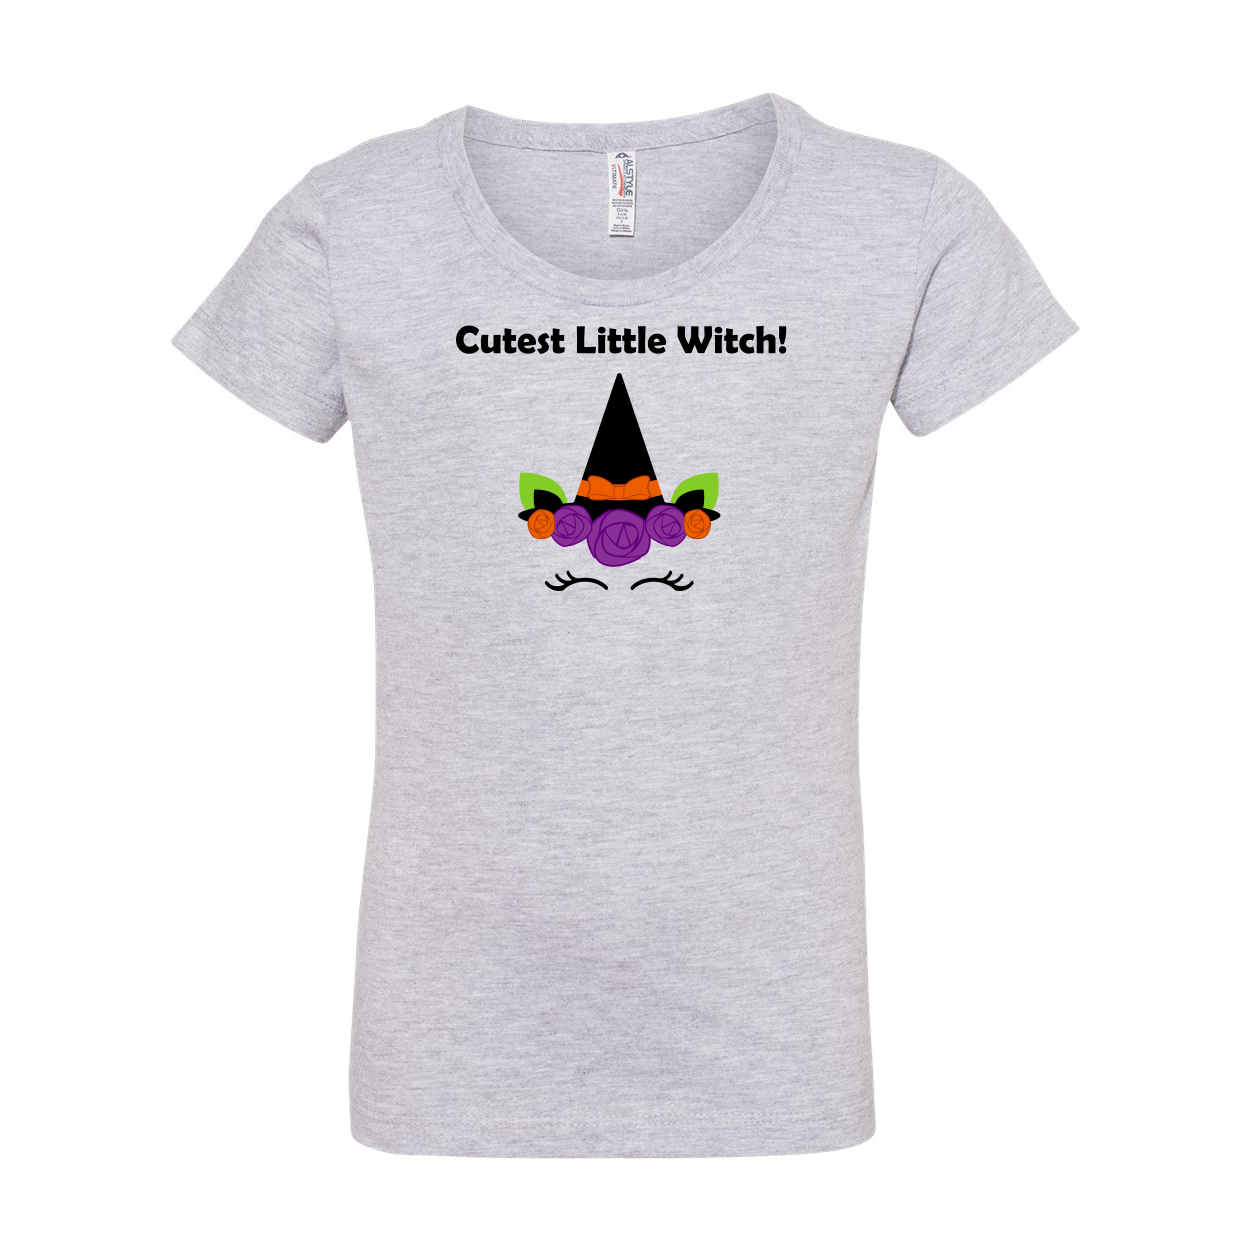 Cutest Little Witch 3362 Girls’ Ultimate T-Shirt